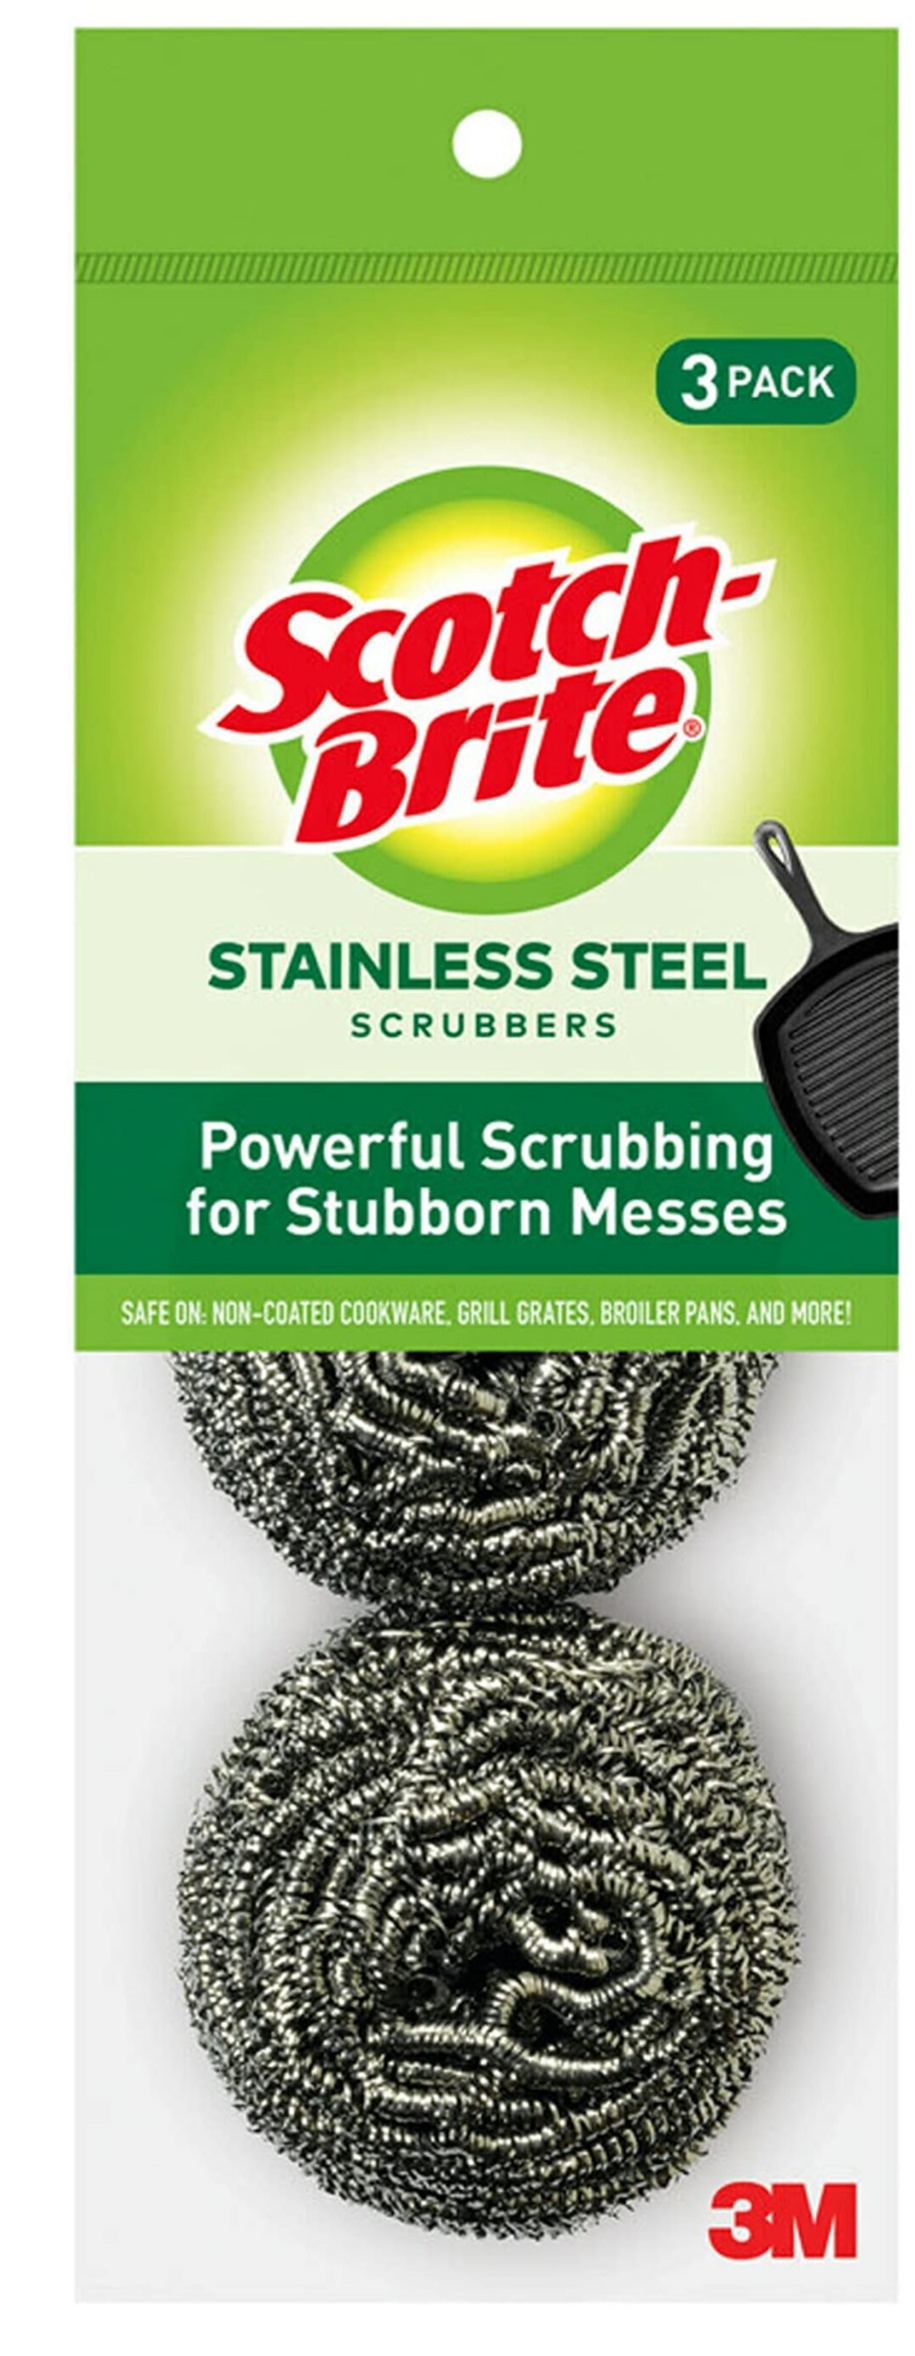 Scotch-Brite Stainless Steel Scrubber [3 Pack] [Subscribe & Save] $2.36 @ Amazon